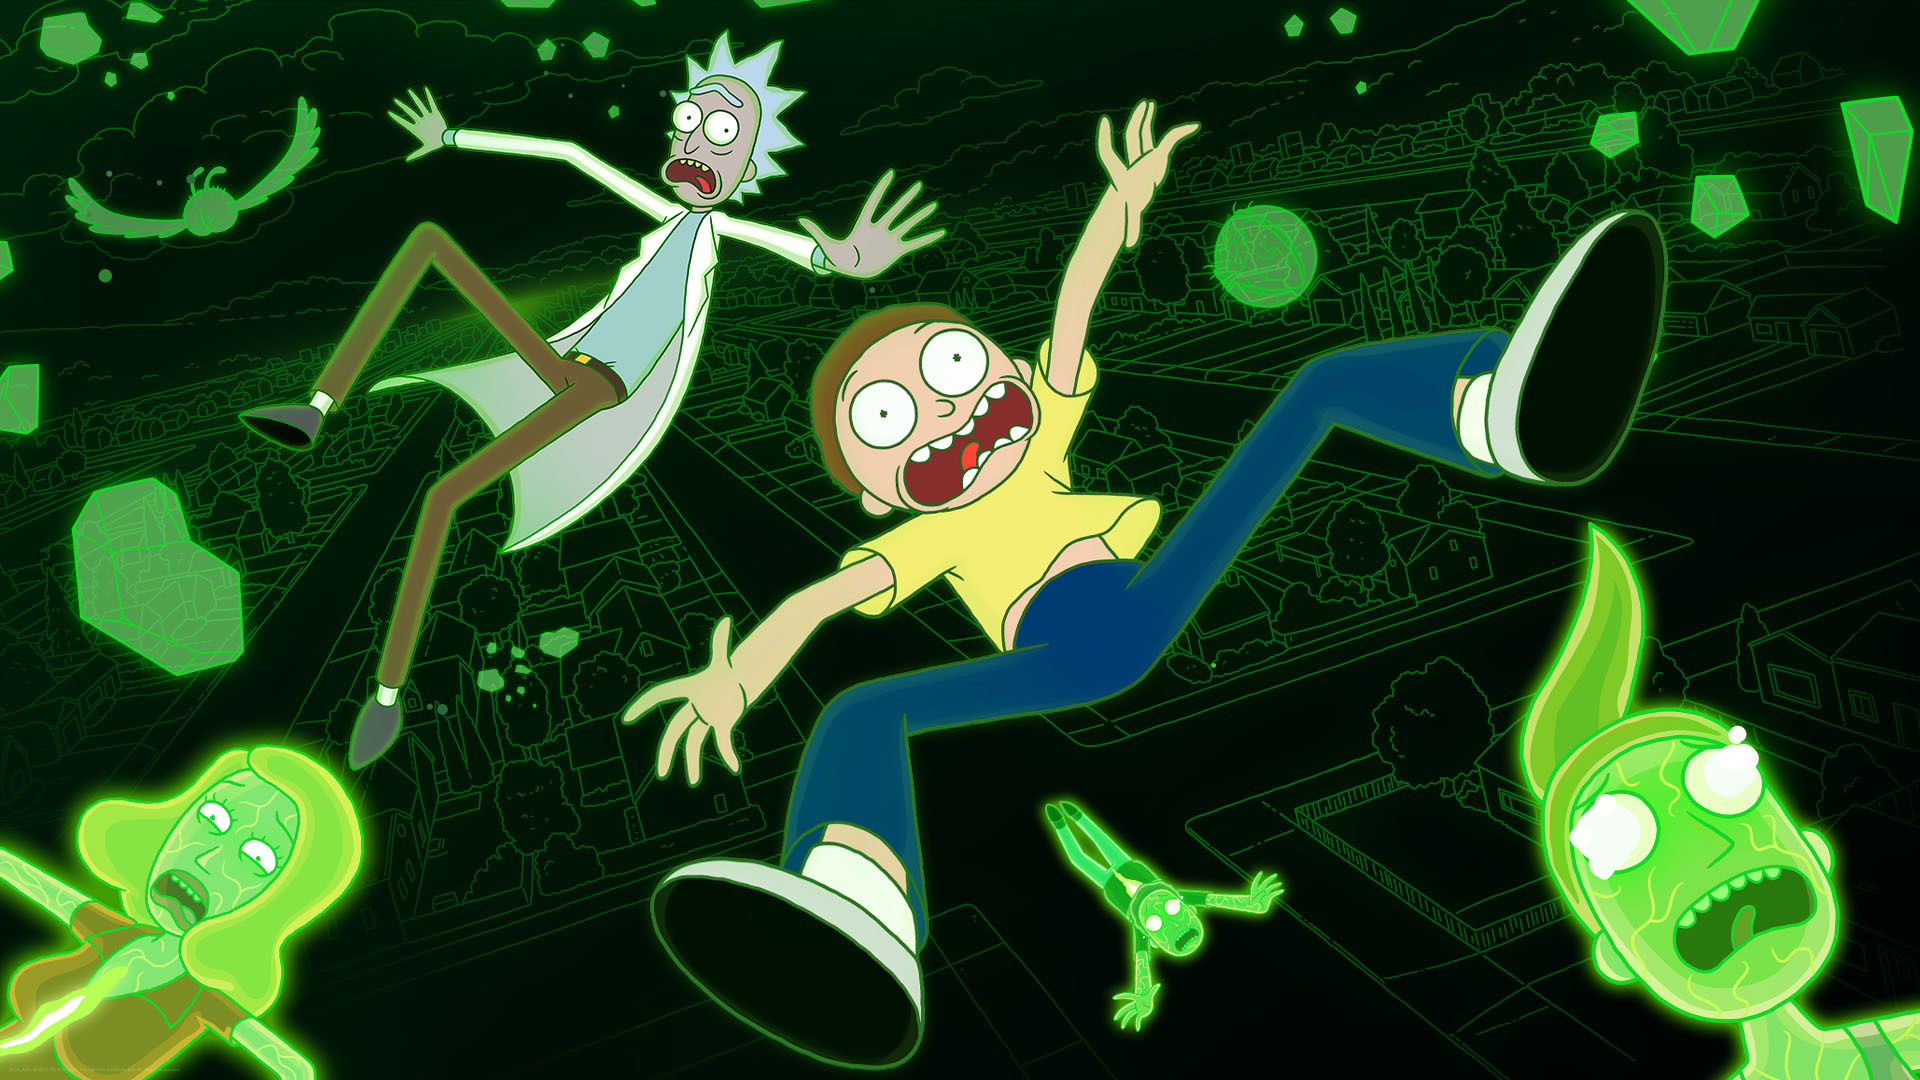 Rick and Morty Premiere #1 Most-Viewed Cable Program With Young